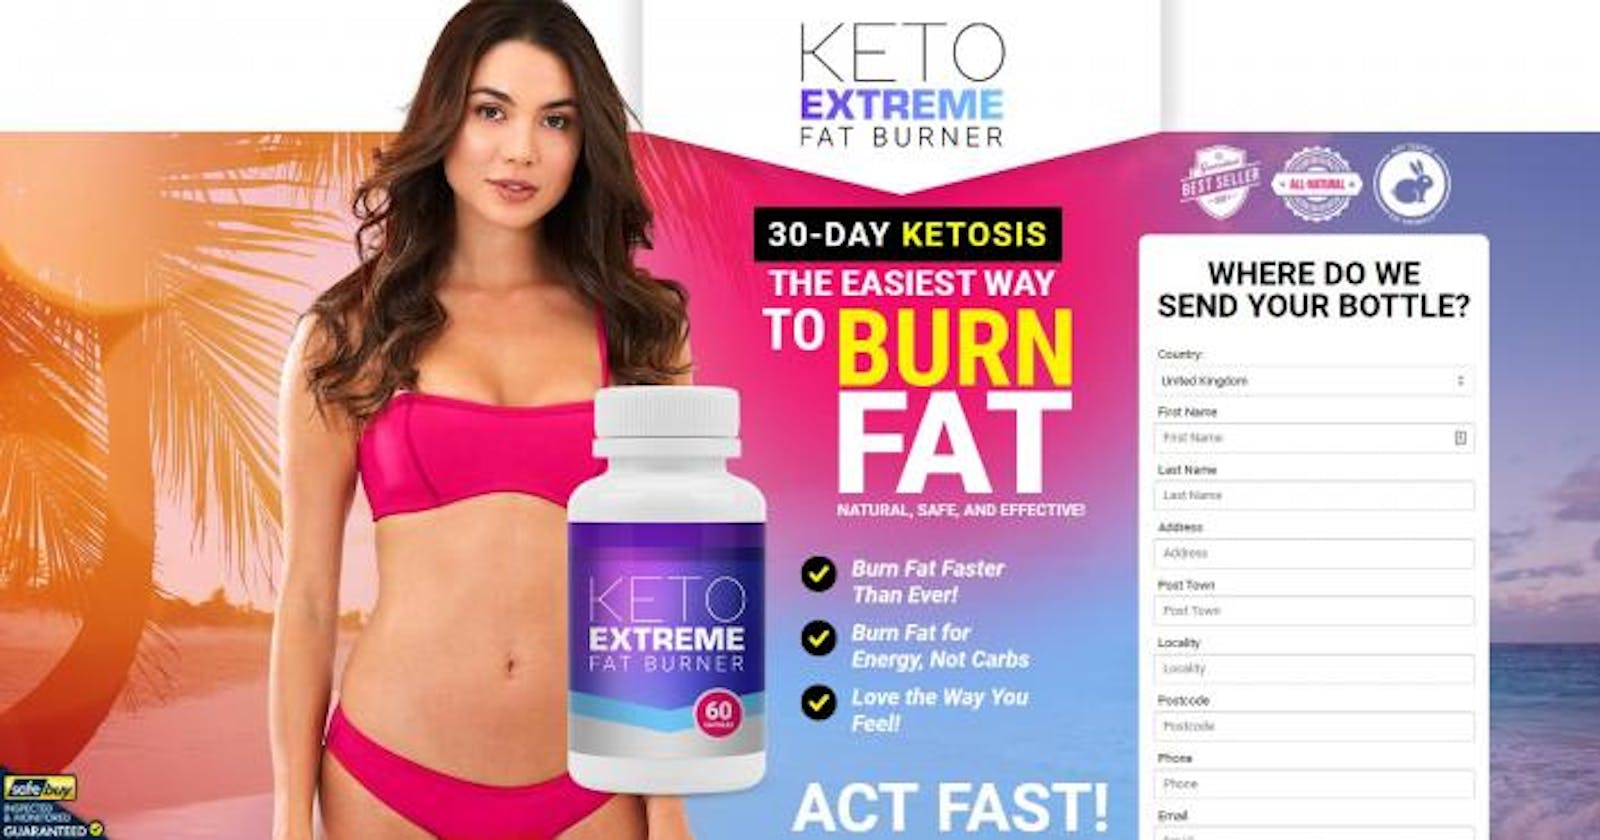 Keto Extreme Fat Burner (Shocking) - Do These Slimming Pills Really Work? Must read before buying!